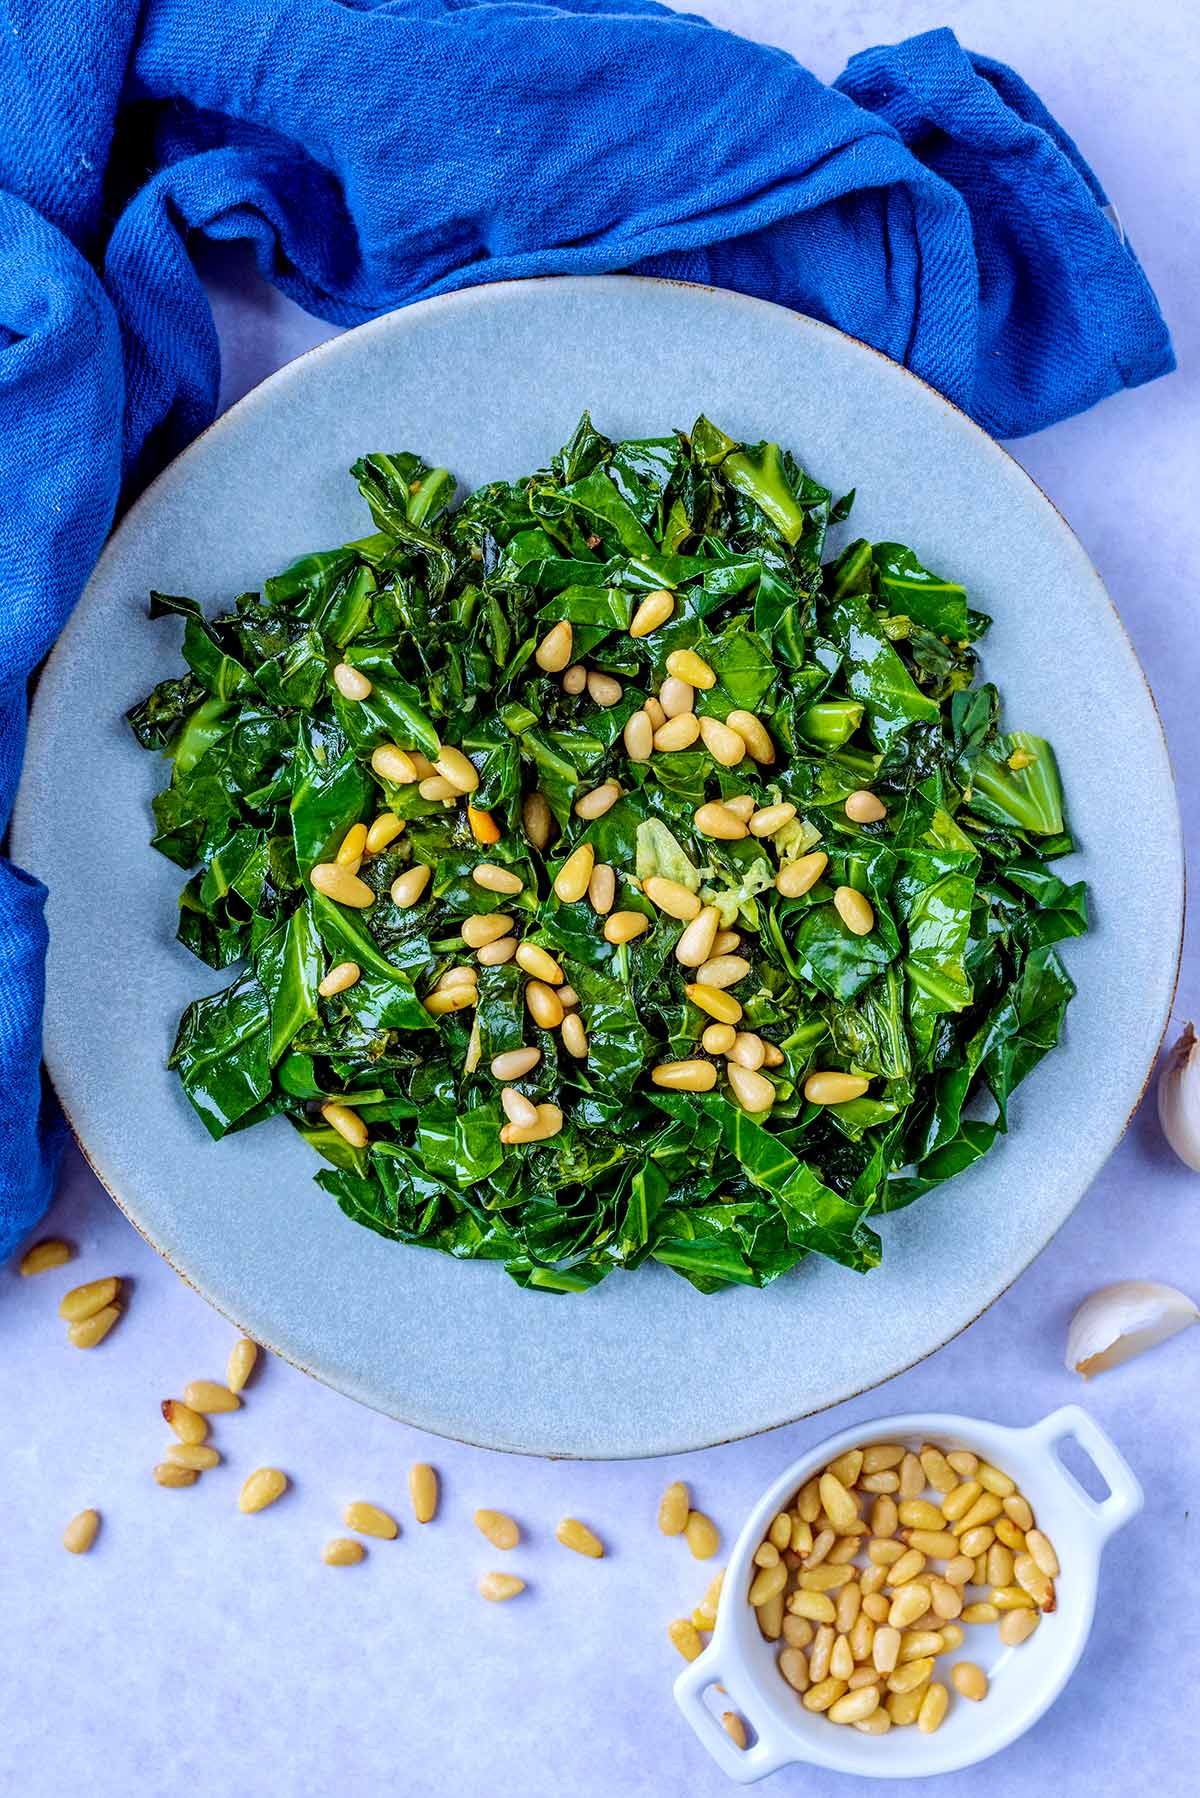 A plate of cooked spring greens next to a blue towel and a small dish of pine nuts.